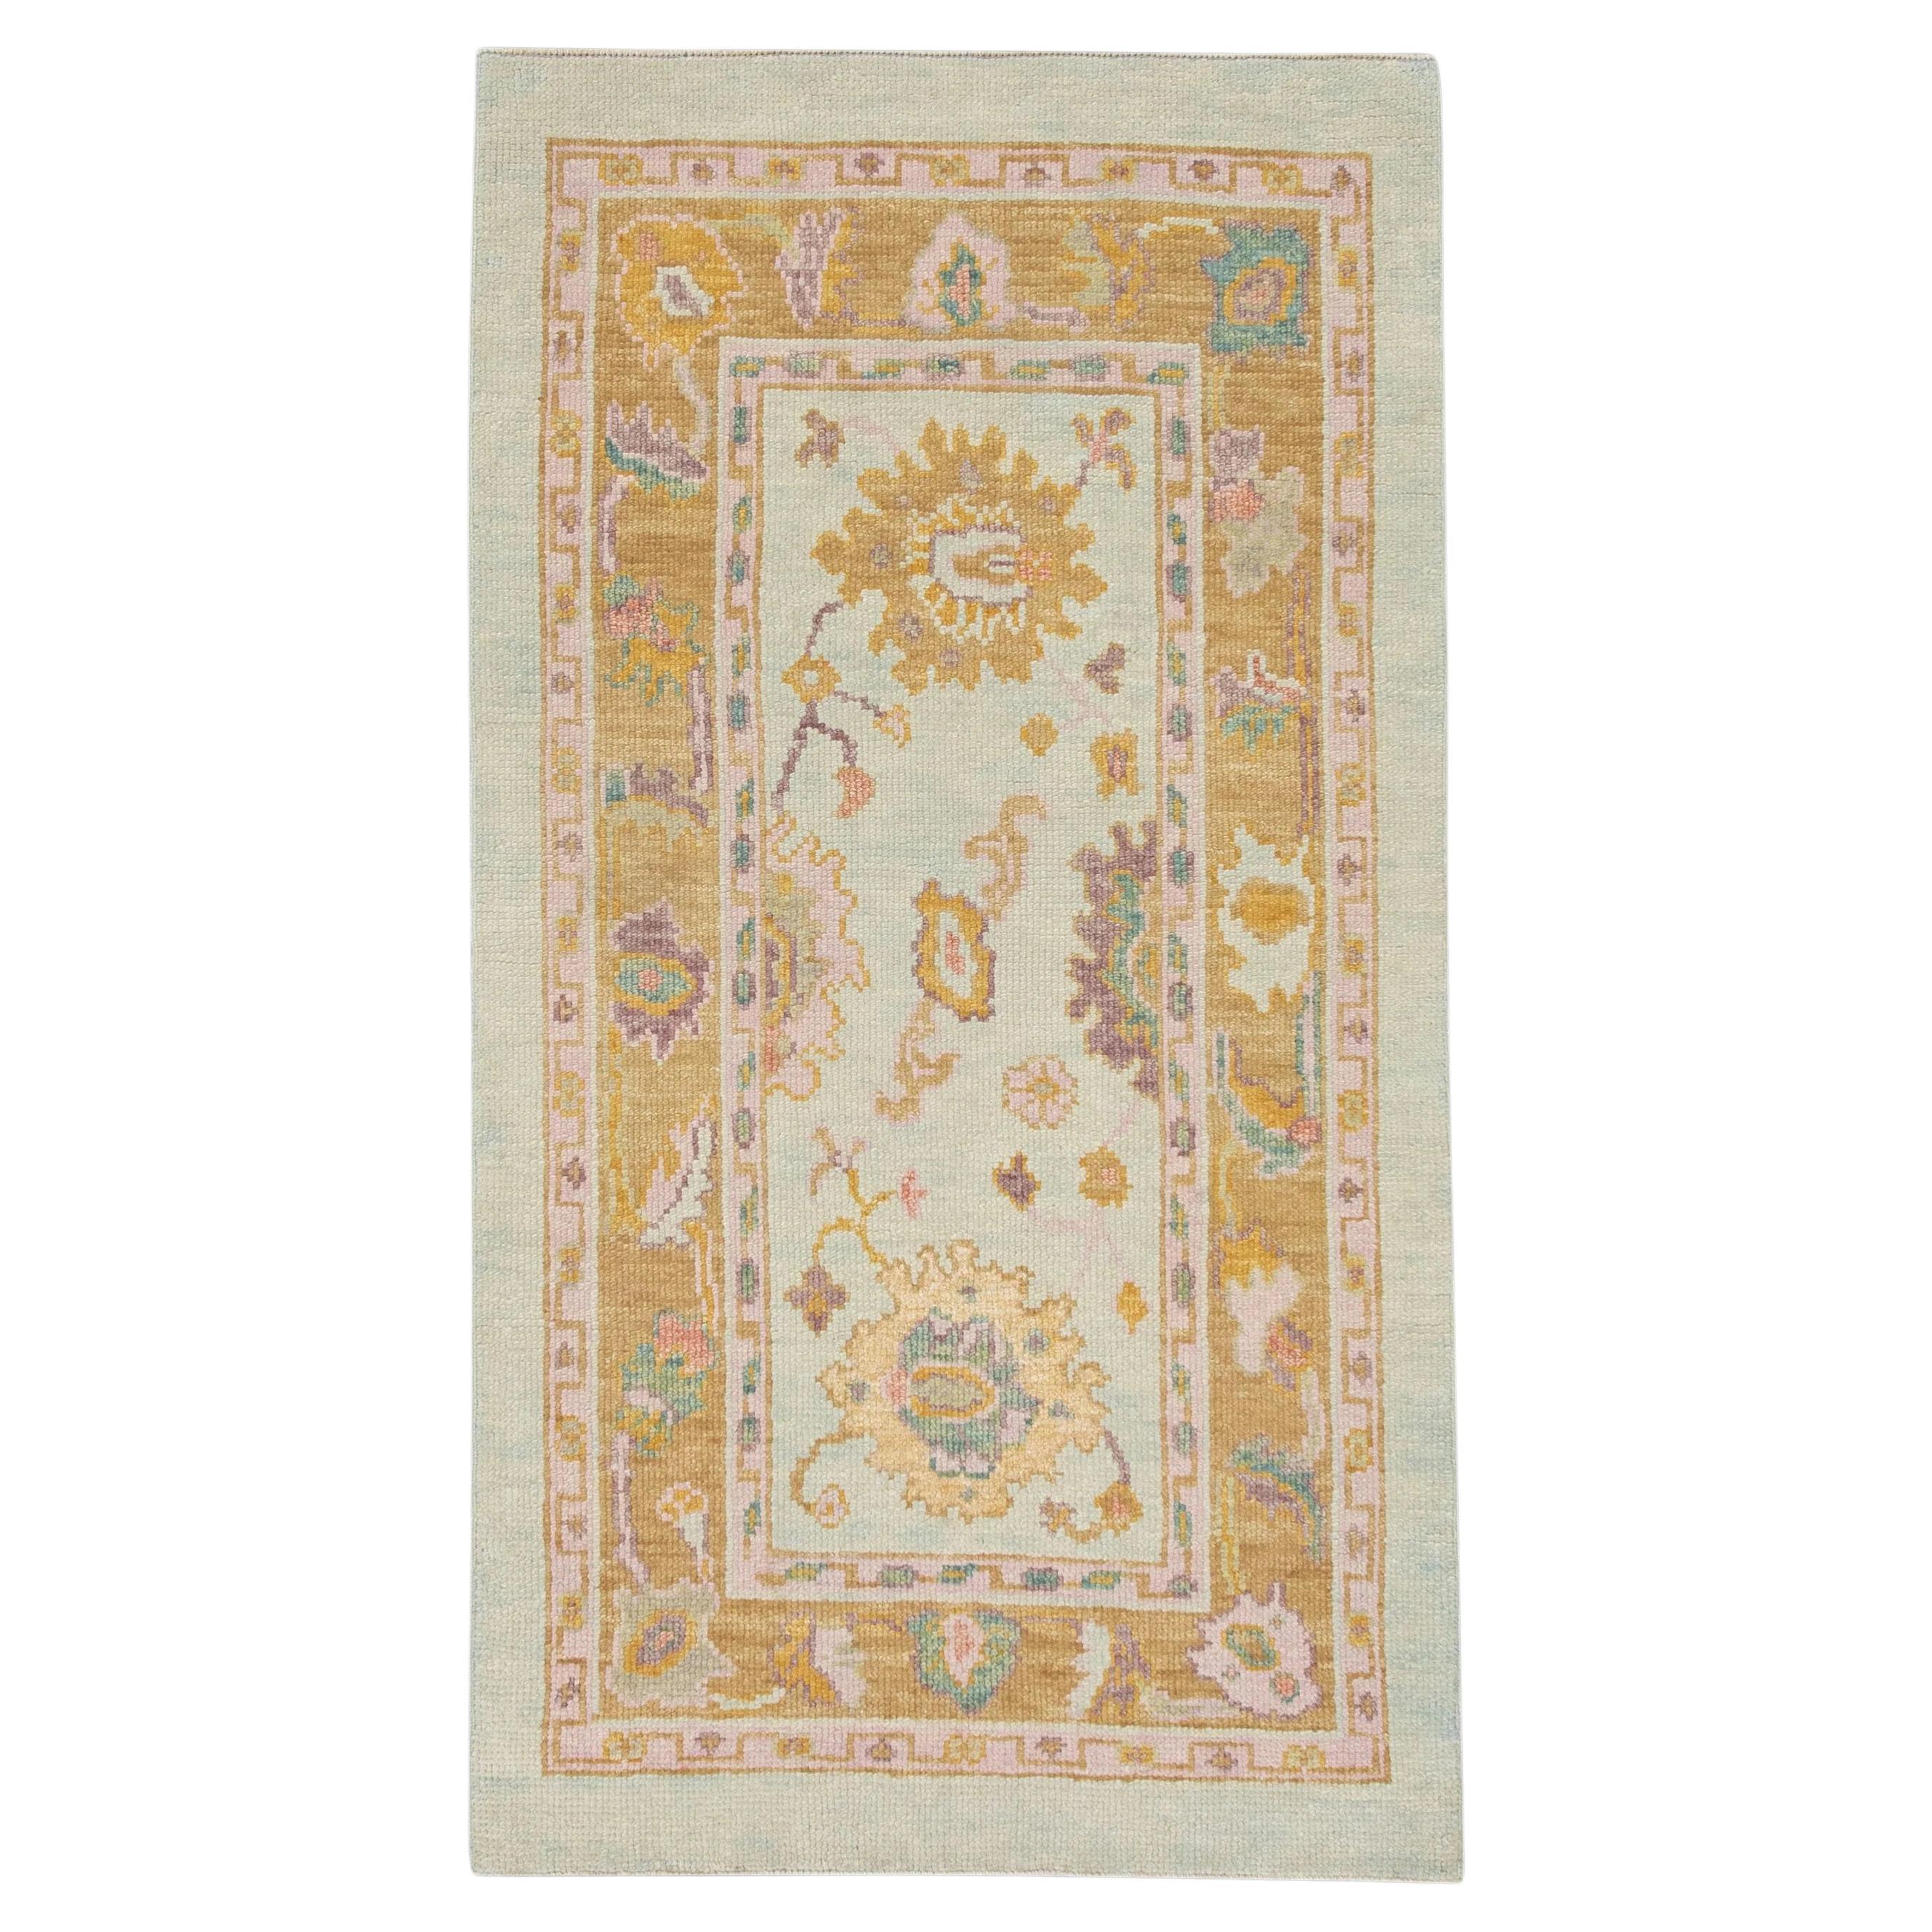 Handwoven Turkish Oushak Rug with Colorful Floral Design 2'10" x 5'2" For Sale